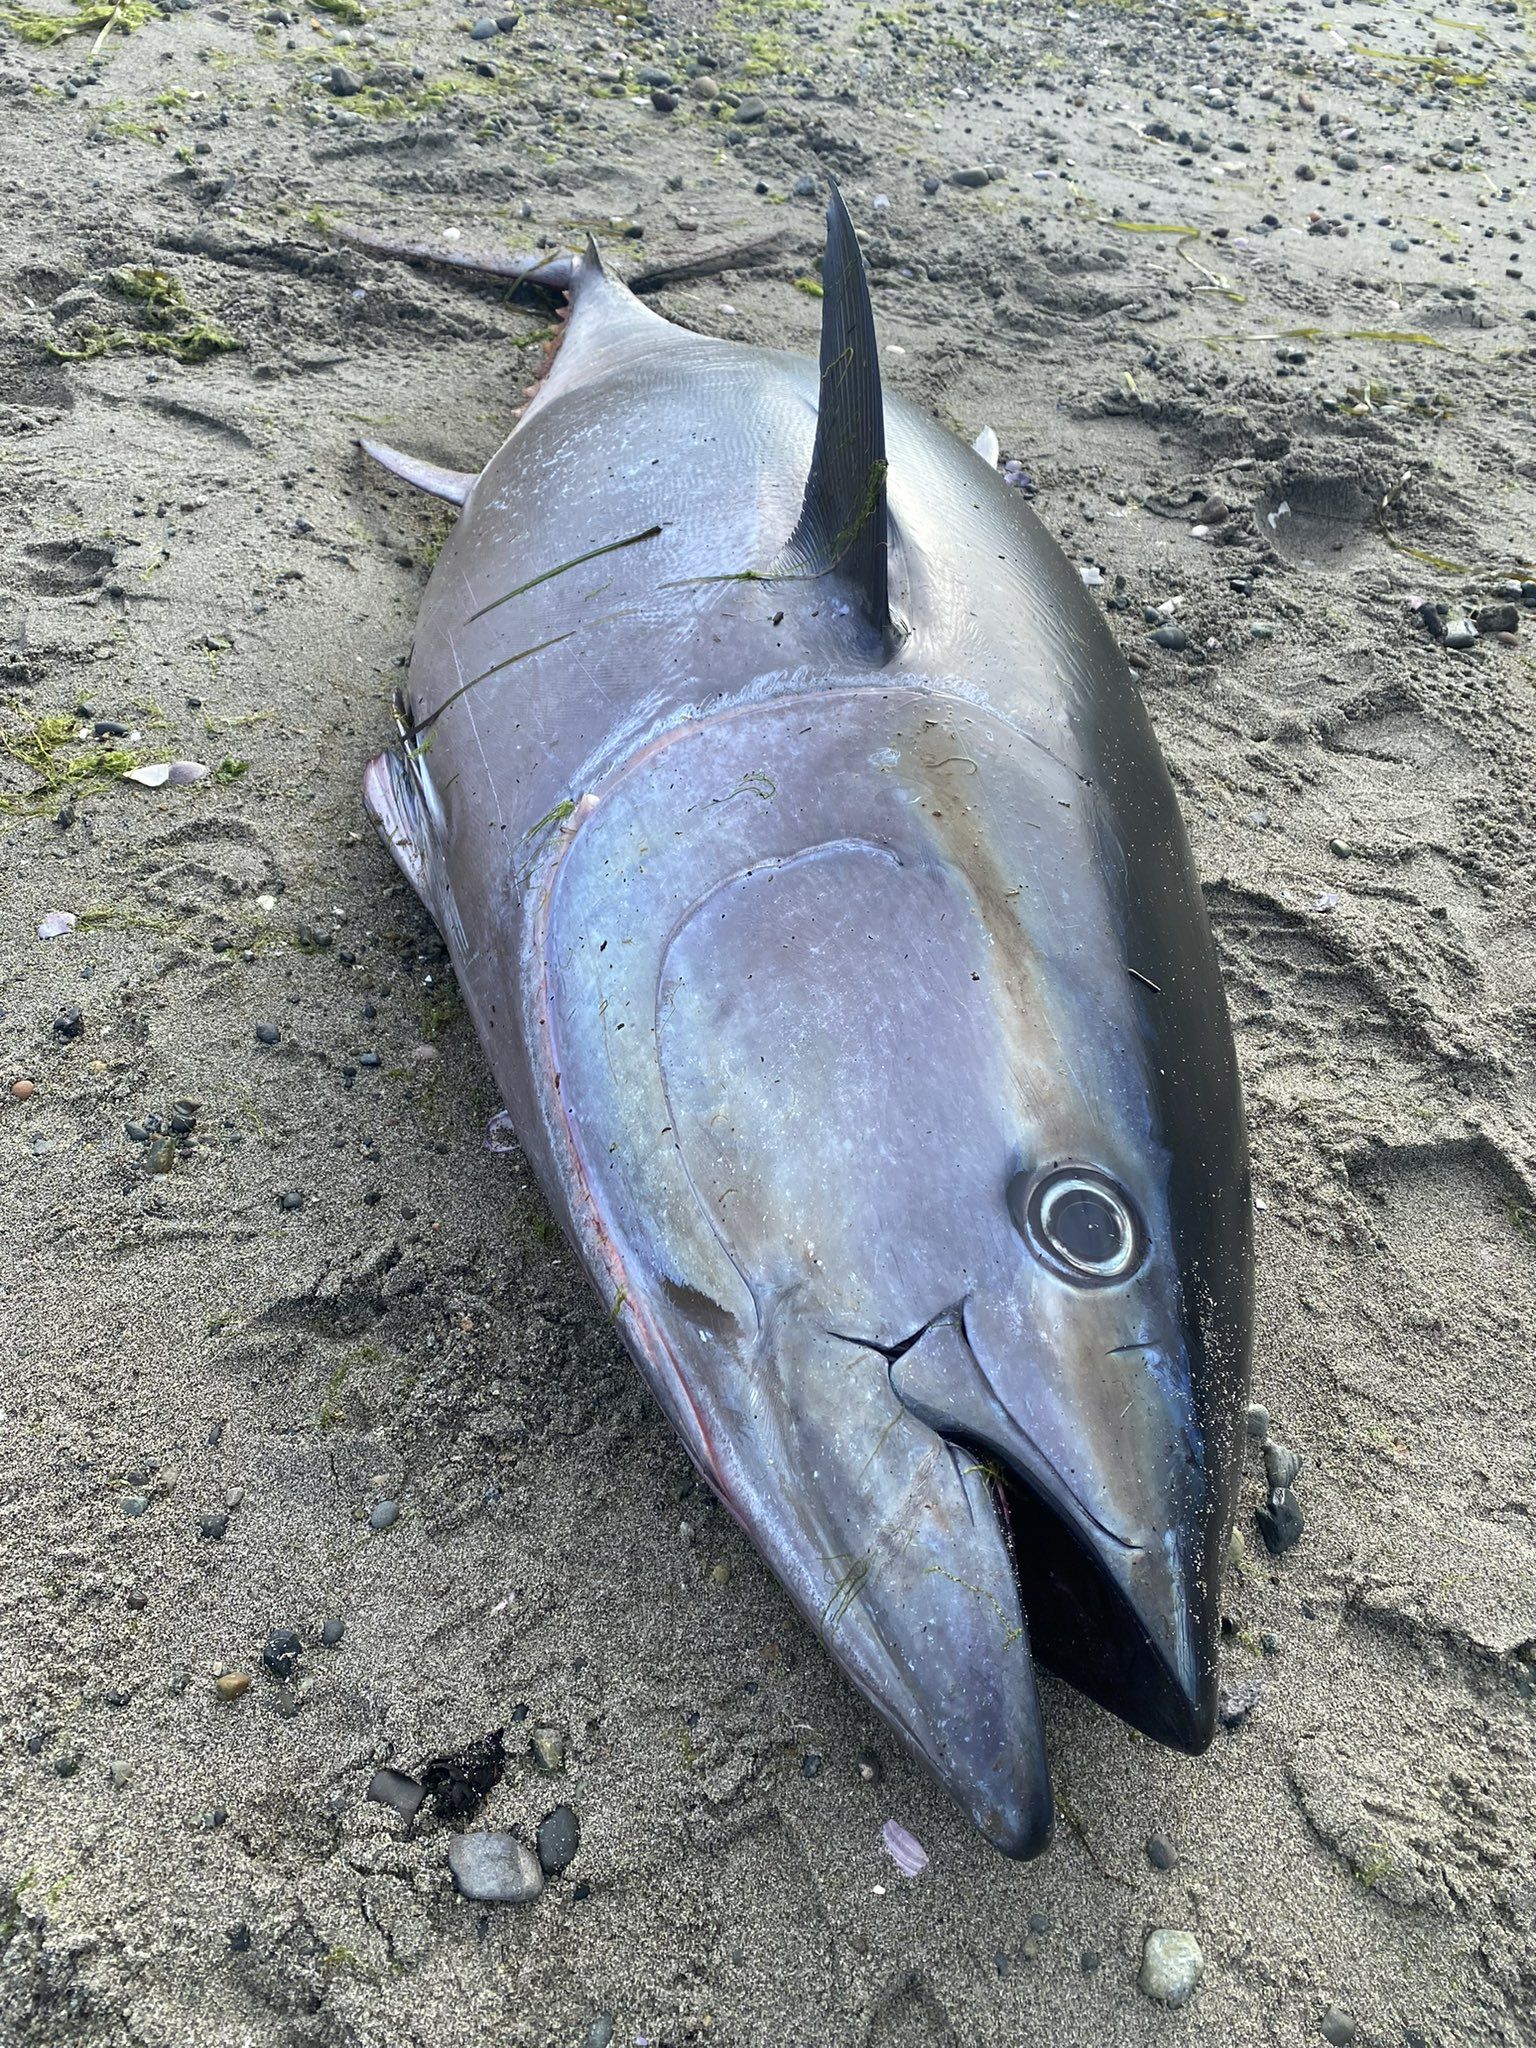 Mystery of 200-pound bluefin tuna washed up on Orcas Island finally